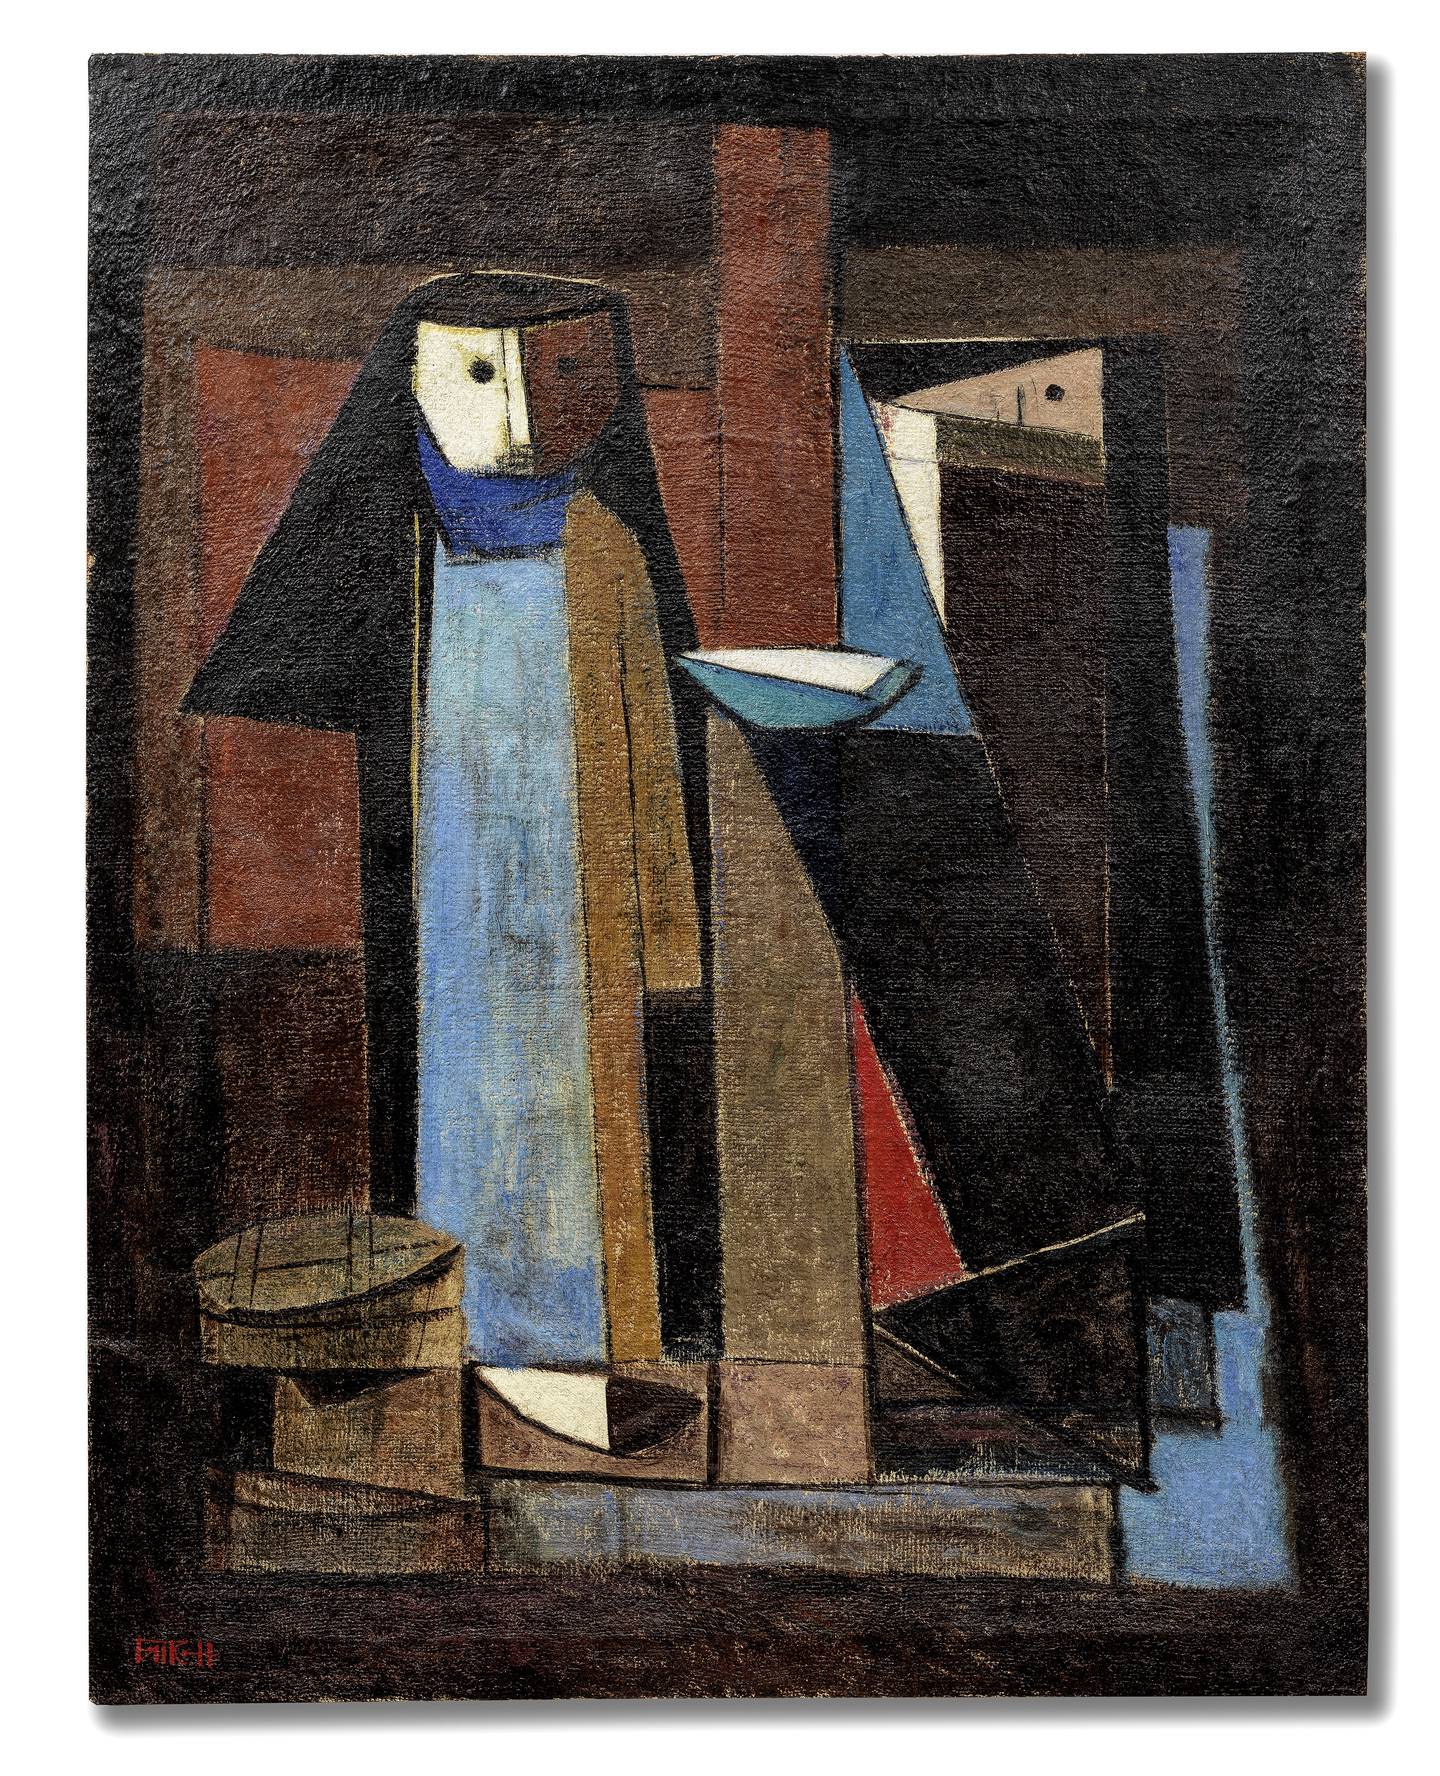 Faeq Hassan's Cubism-inspired 'El-Allabat' (The Curd Sellers), painted in the early 1950s. Photo: Bonhams